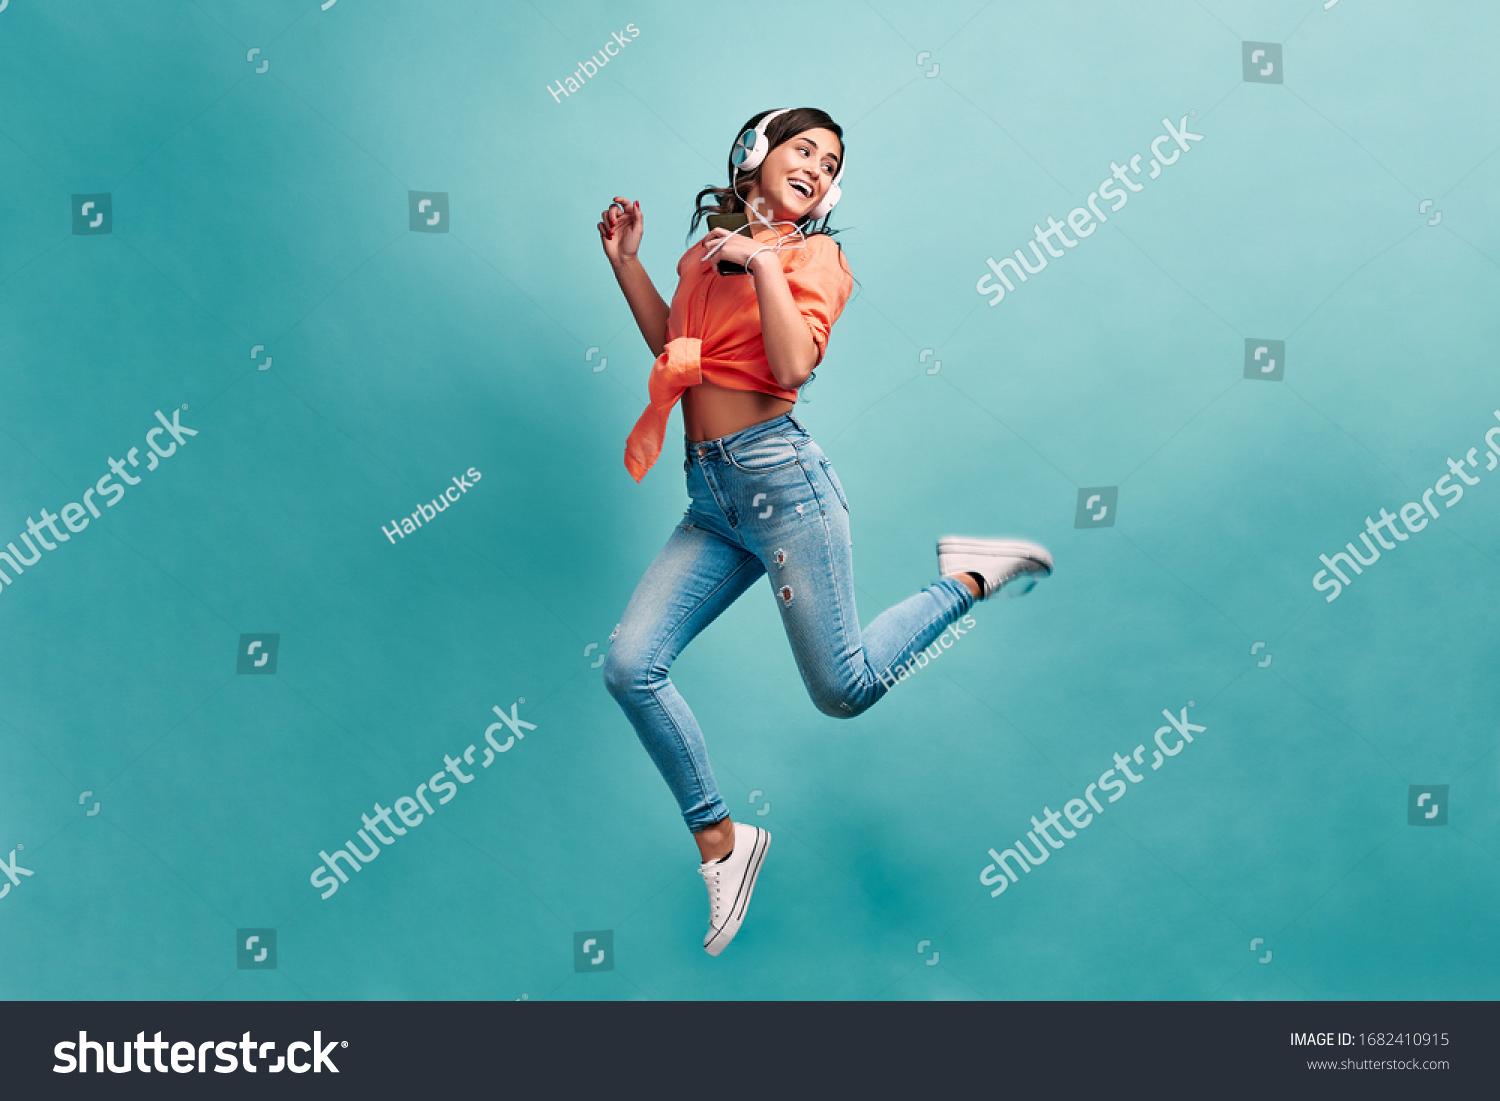 Young beautiful energy girl with white headphones listening to music laughs and jump on blue background in studio and looks away.Dressed in an orange shirt and light jeans, holding a phone. #1682410915